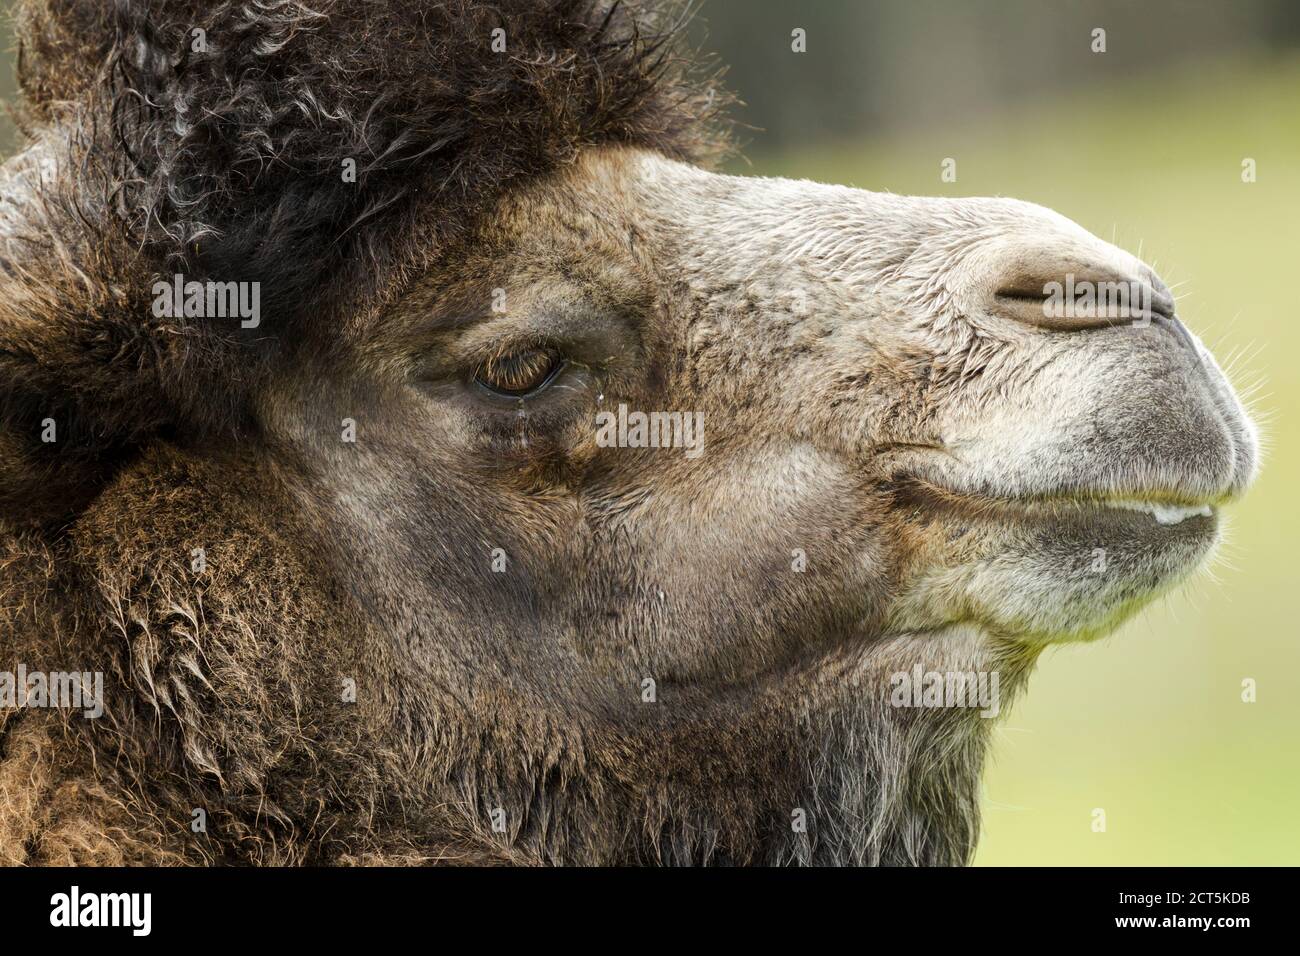 Bactrian camel (Camelus bactrianus) close up view of head and face. Captive specimen. Stock Photo